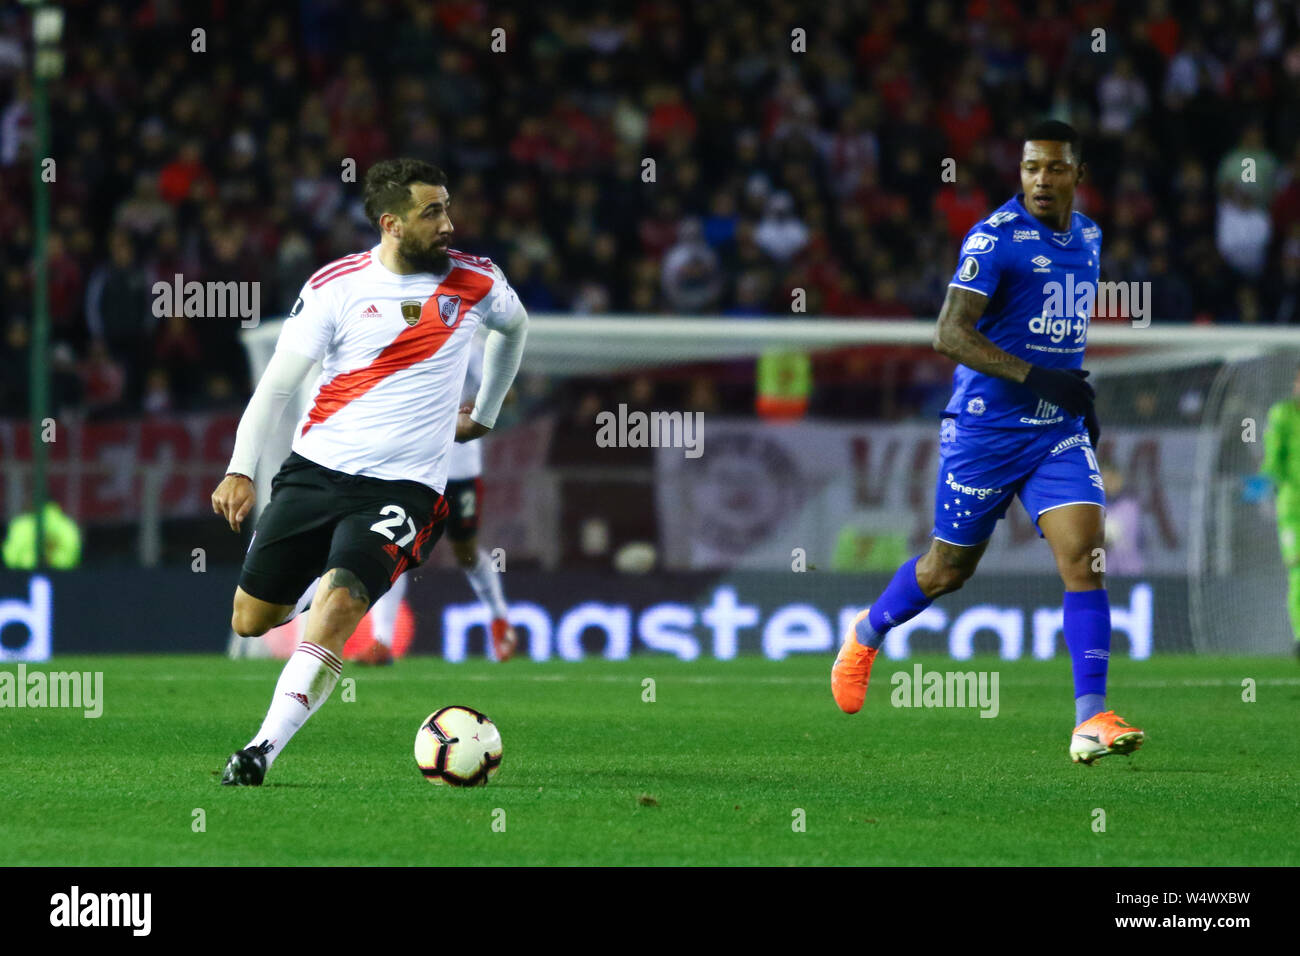 BUENOS AIRES, 23.07.2019: Lucas Romero during the match between River Plate (ARG) and Cruzeiro (BRA) for match of Conmebol Libertadores on Monumental Stock Photo